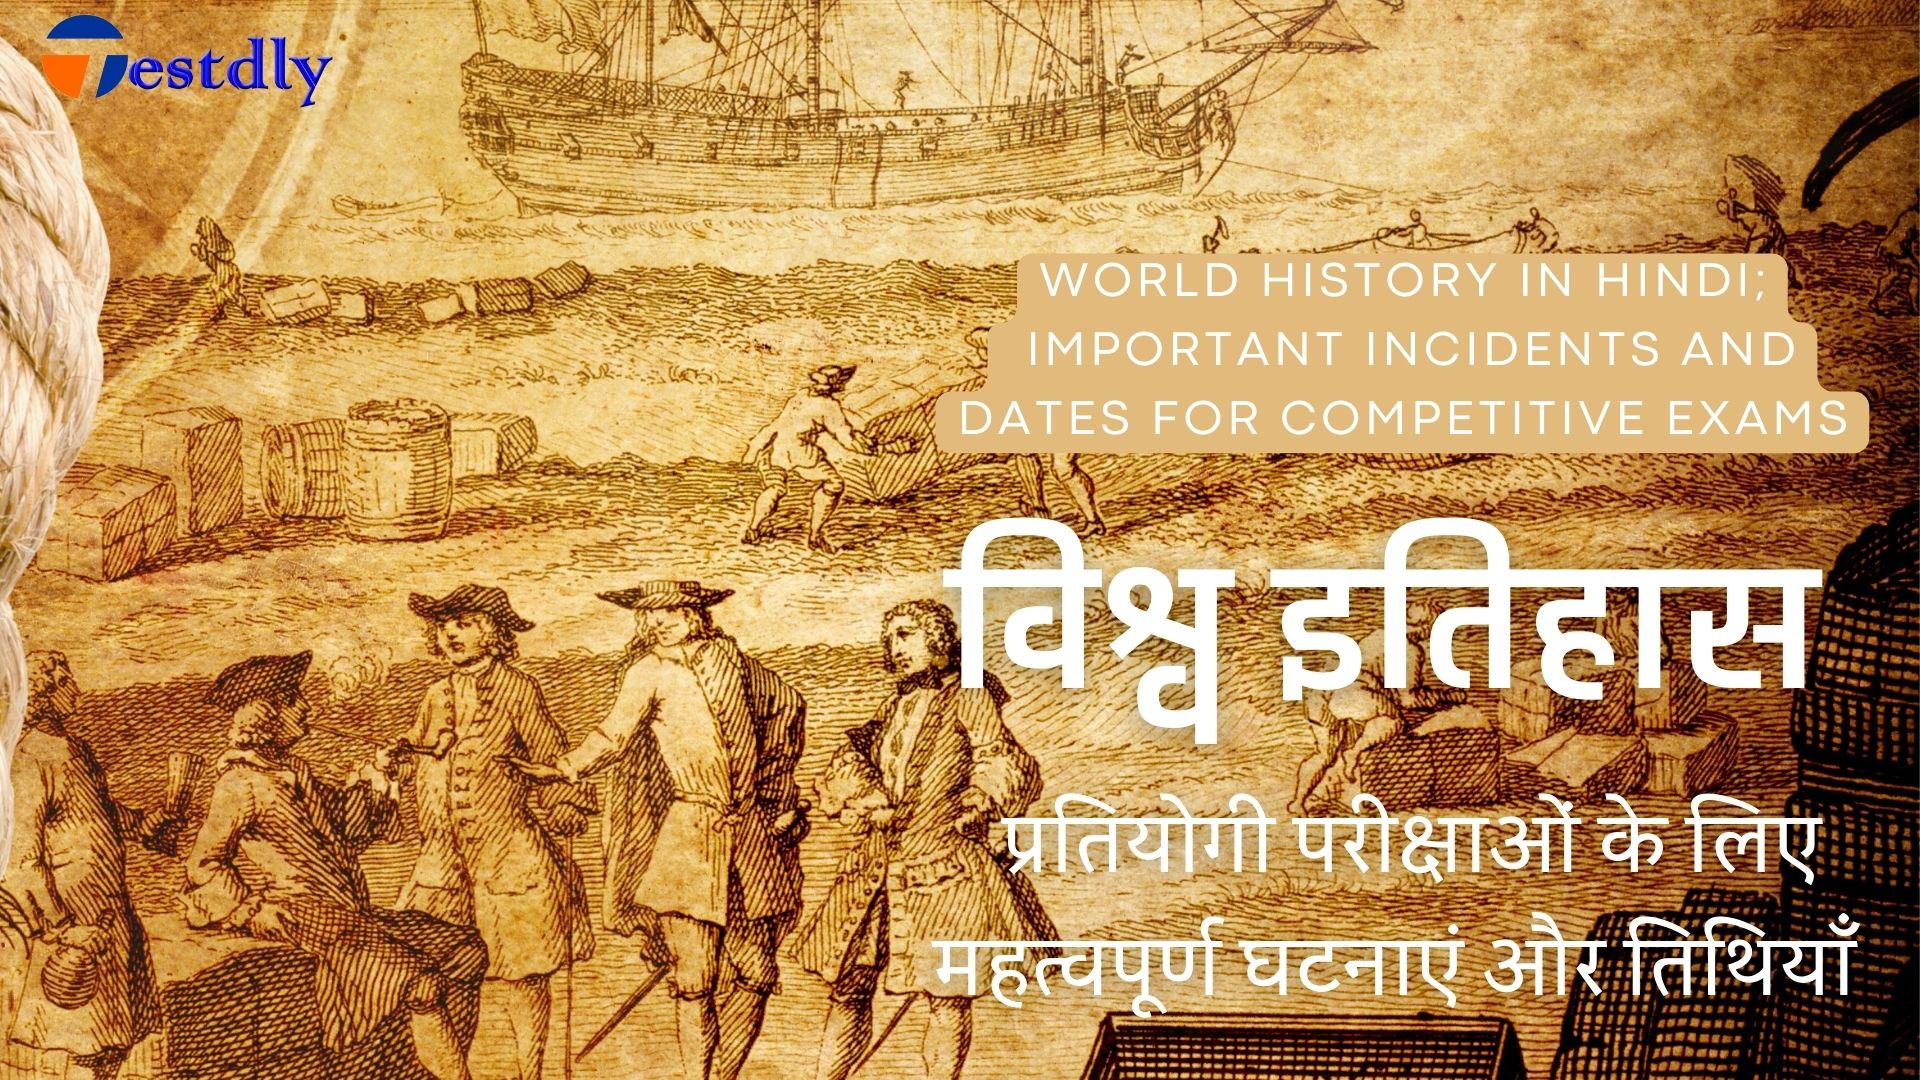 world history in hindi; important incident and dates for competitive exams